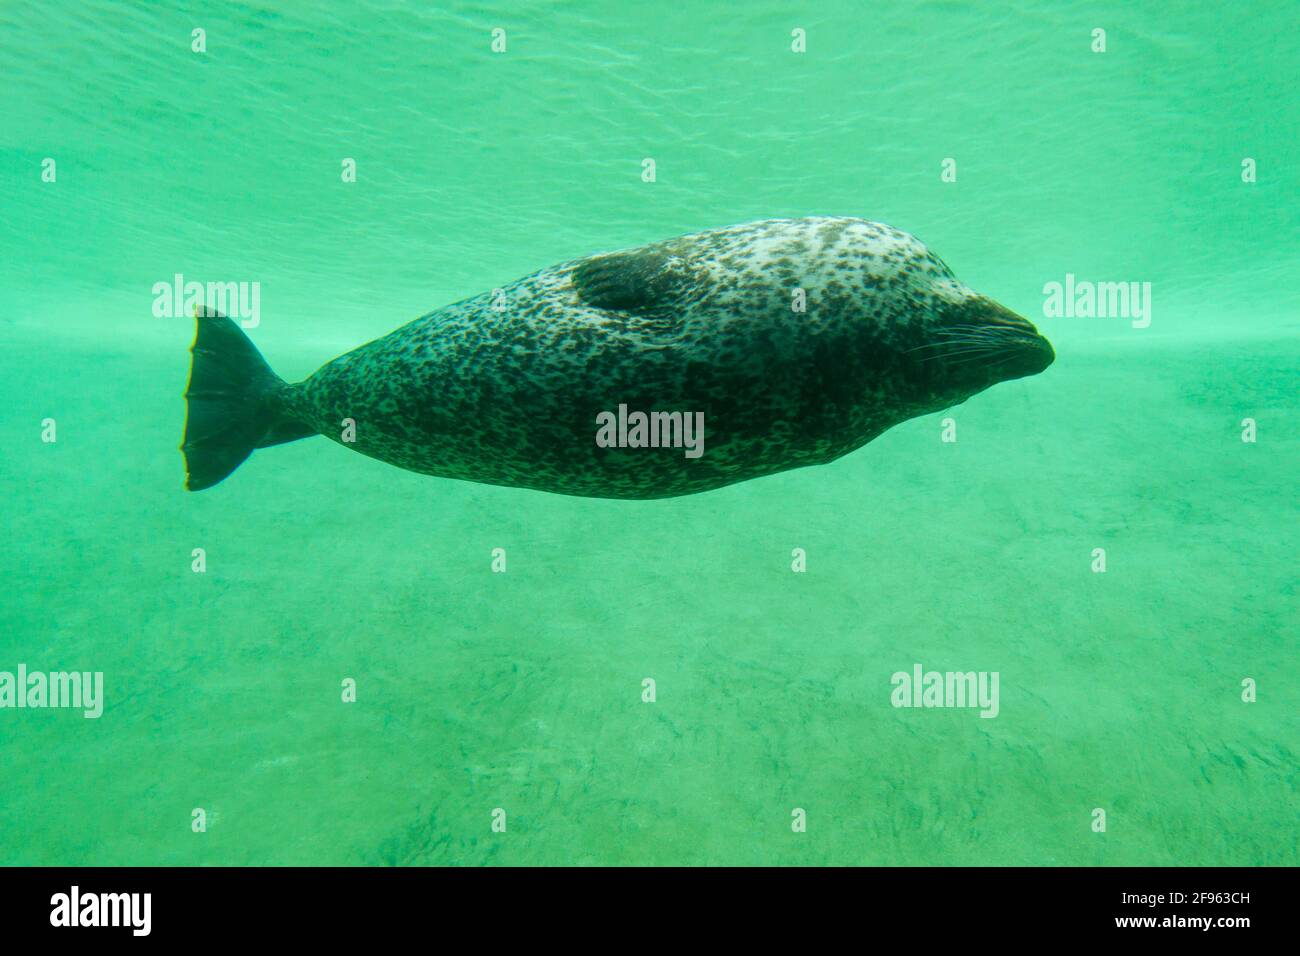 Common seal / harbour seal swimming upside down underwater in basin at Seal Centre / Seehundstation Friedrichskoog, Schleswig-Holstein, Germany Stock Photo